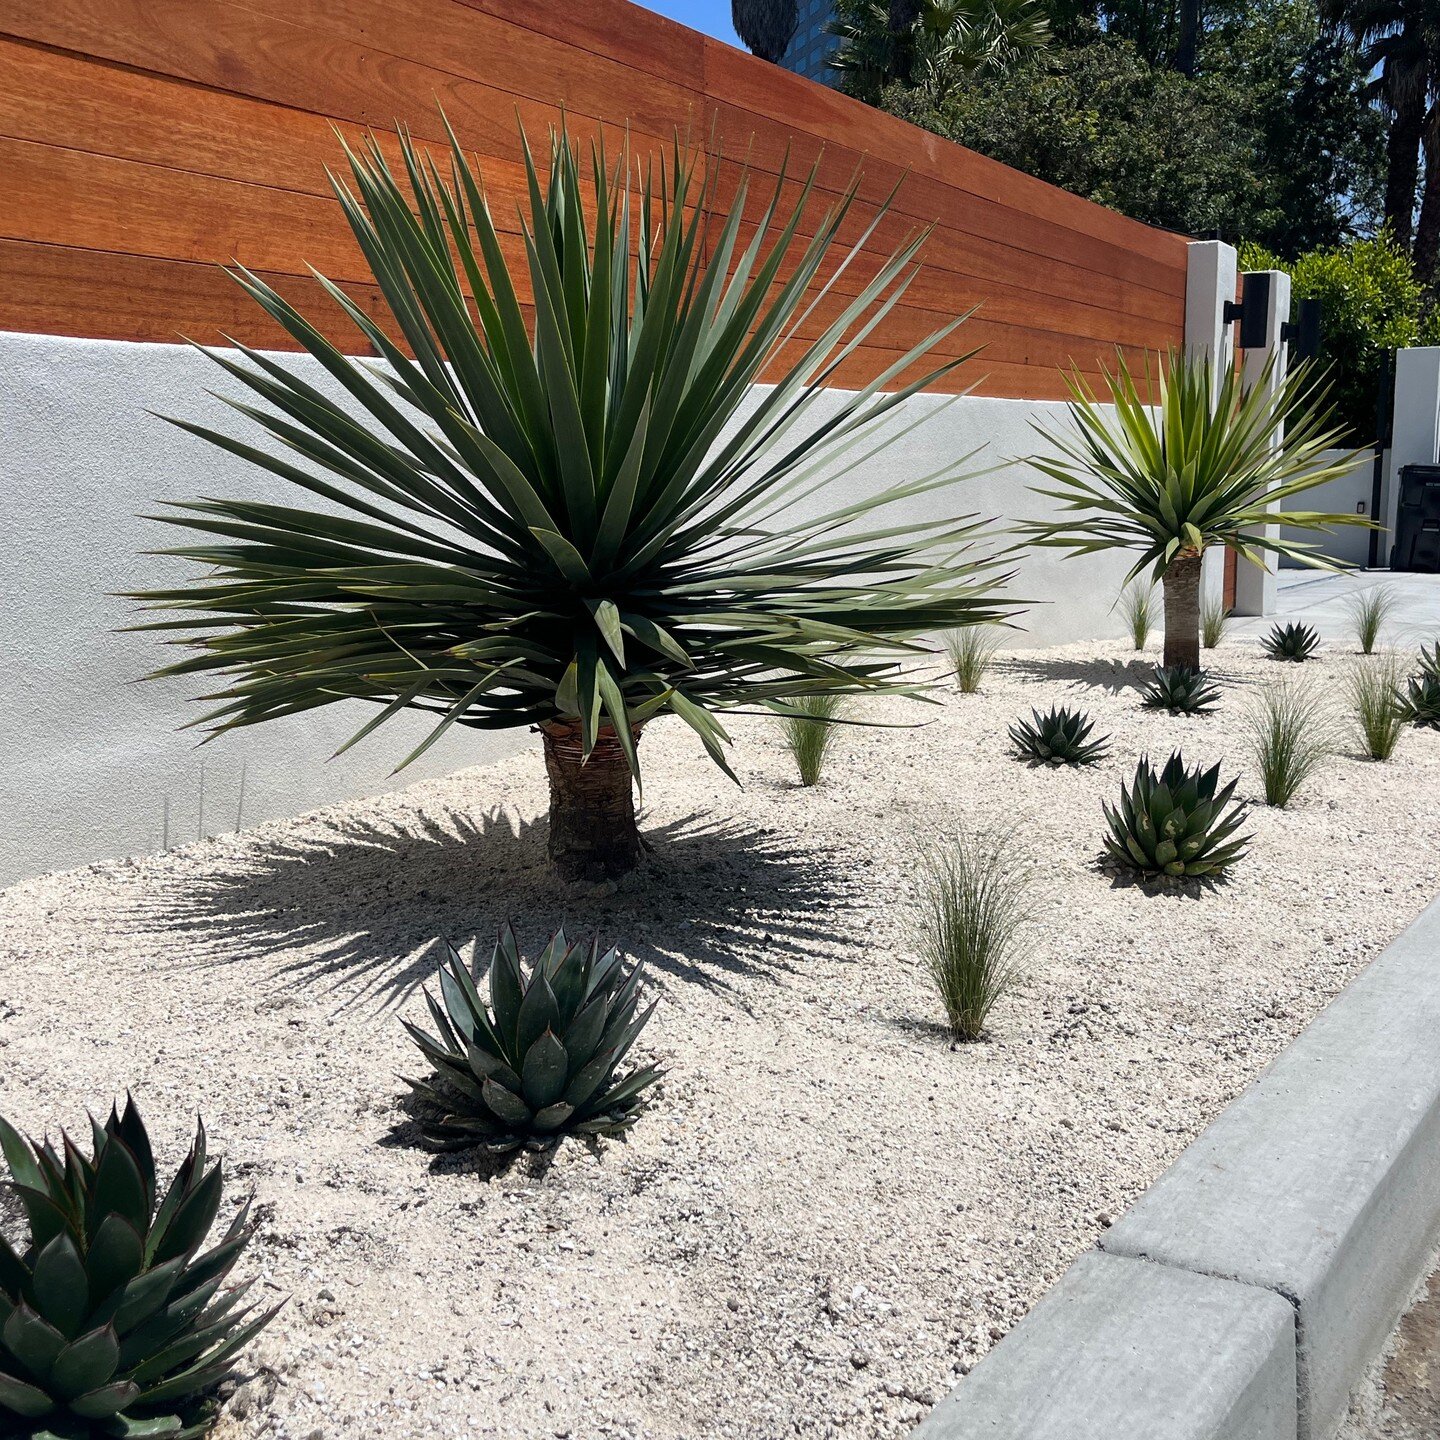 Studio City Entrance

This entrance to a home in Studio City was a &ldquo;hot spot&rdquo;. Tons of direct sun and very little water. Our client wanted a graphic, dramatic planting. We planted Dragon Trees and Blue Flame Agaves, along with grasses whi